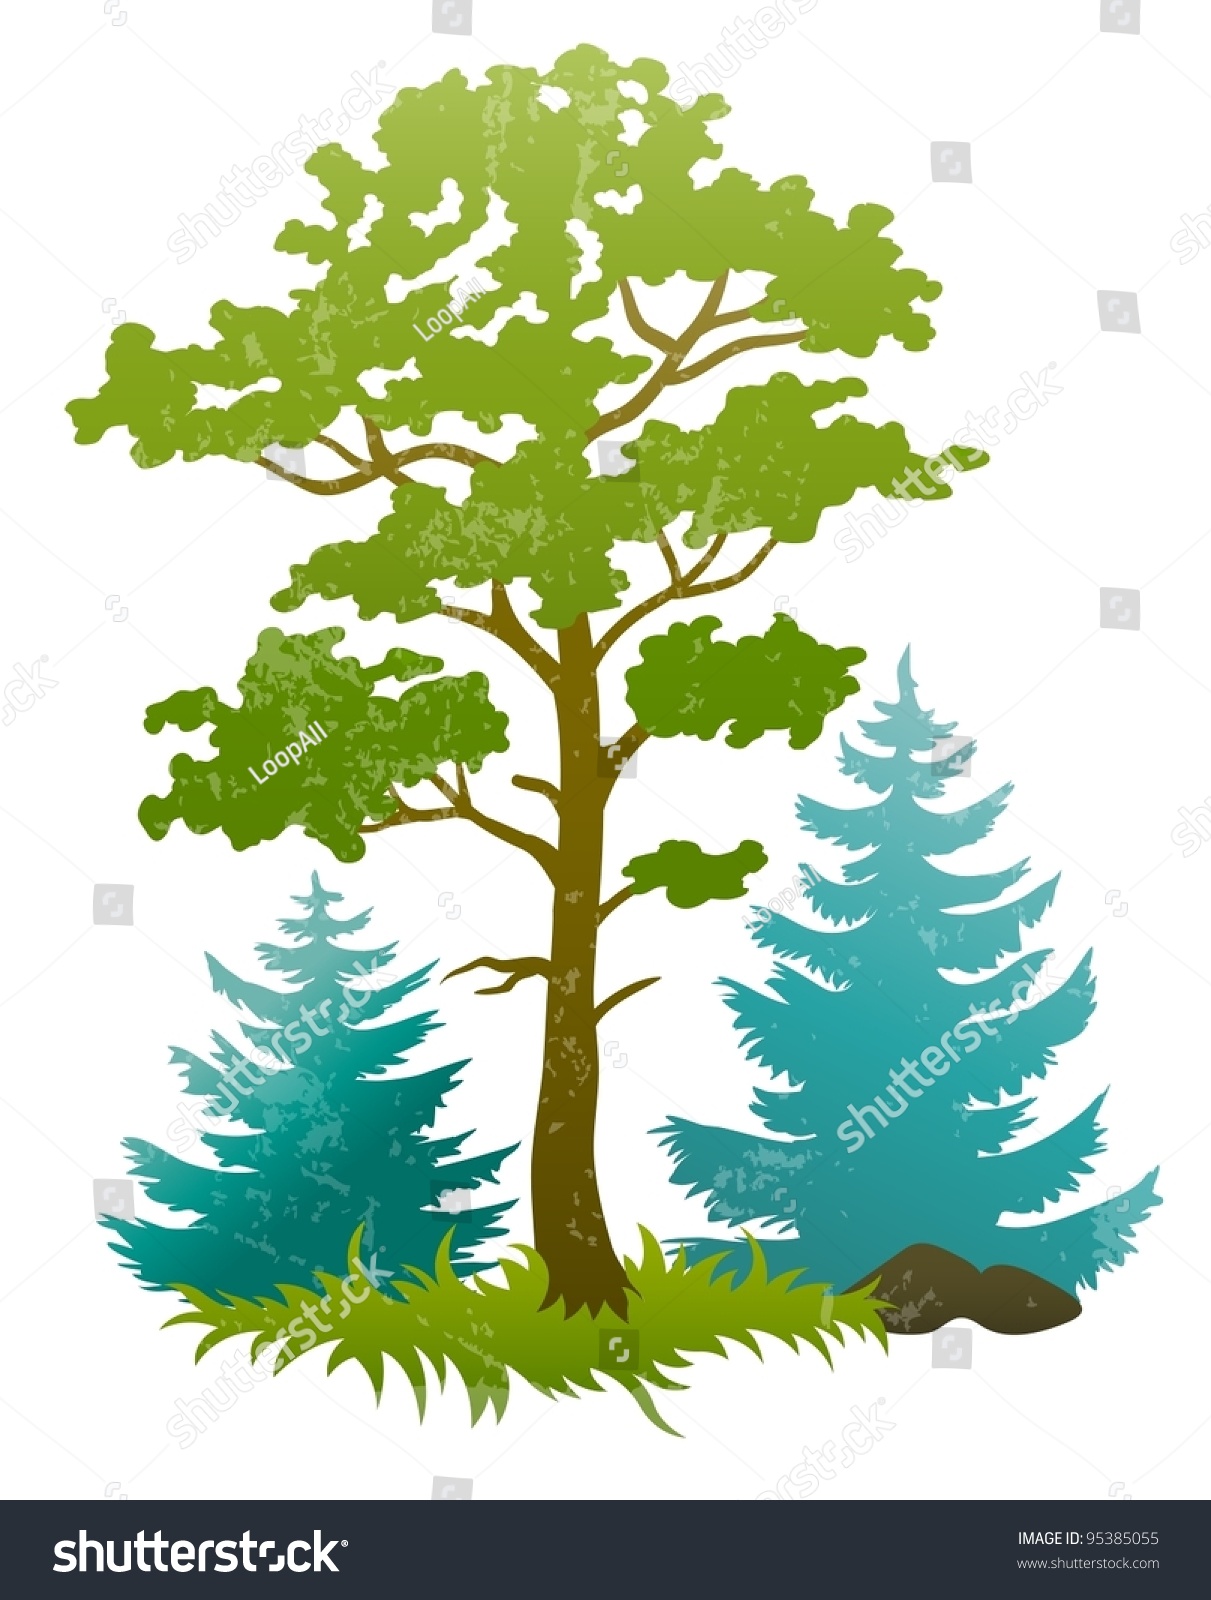 Grunge Silhouettes Forest Tree Firtrees Vector Stock Vector 95385055